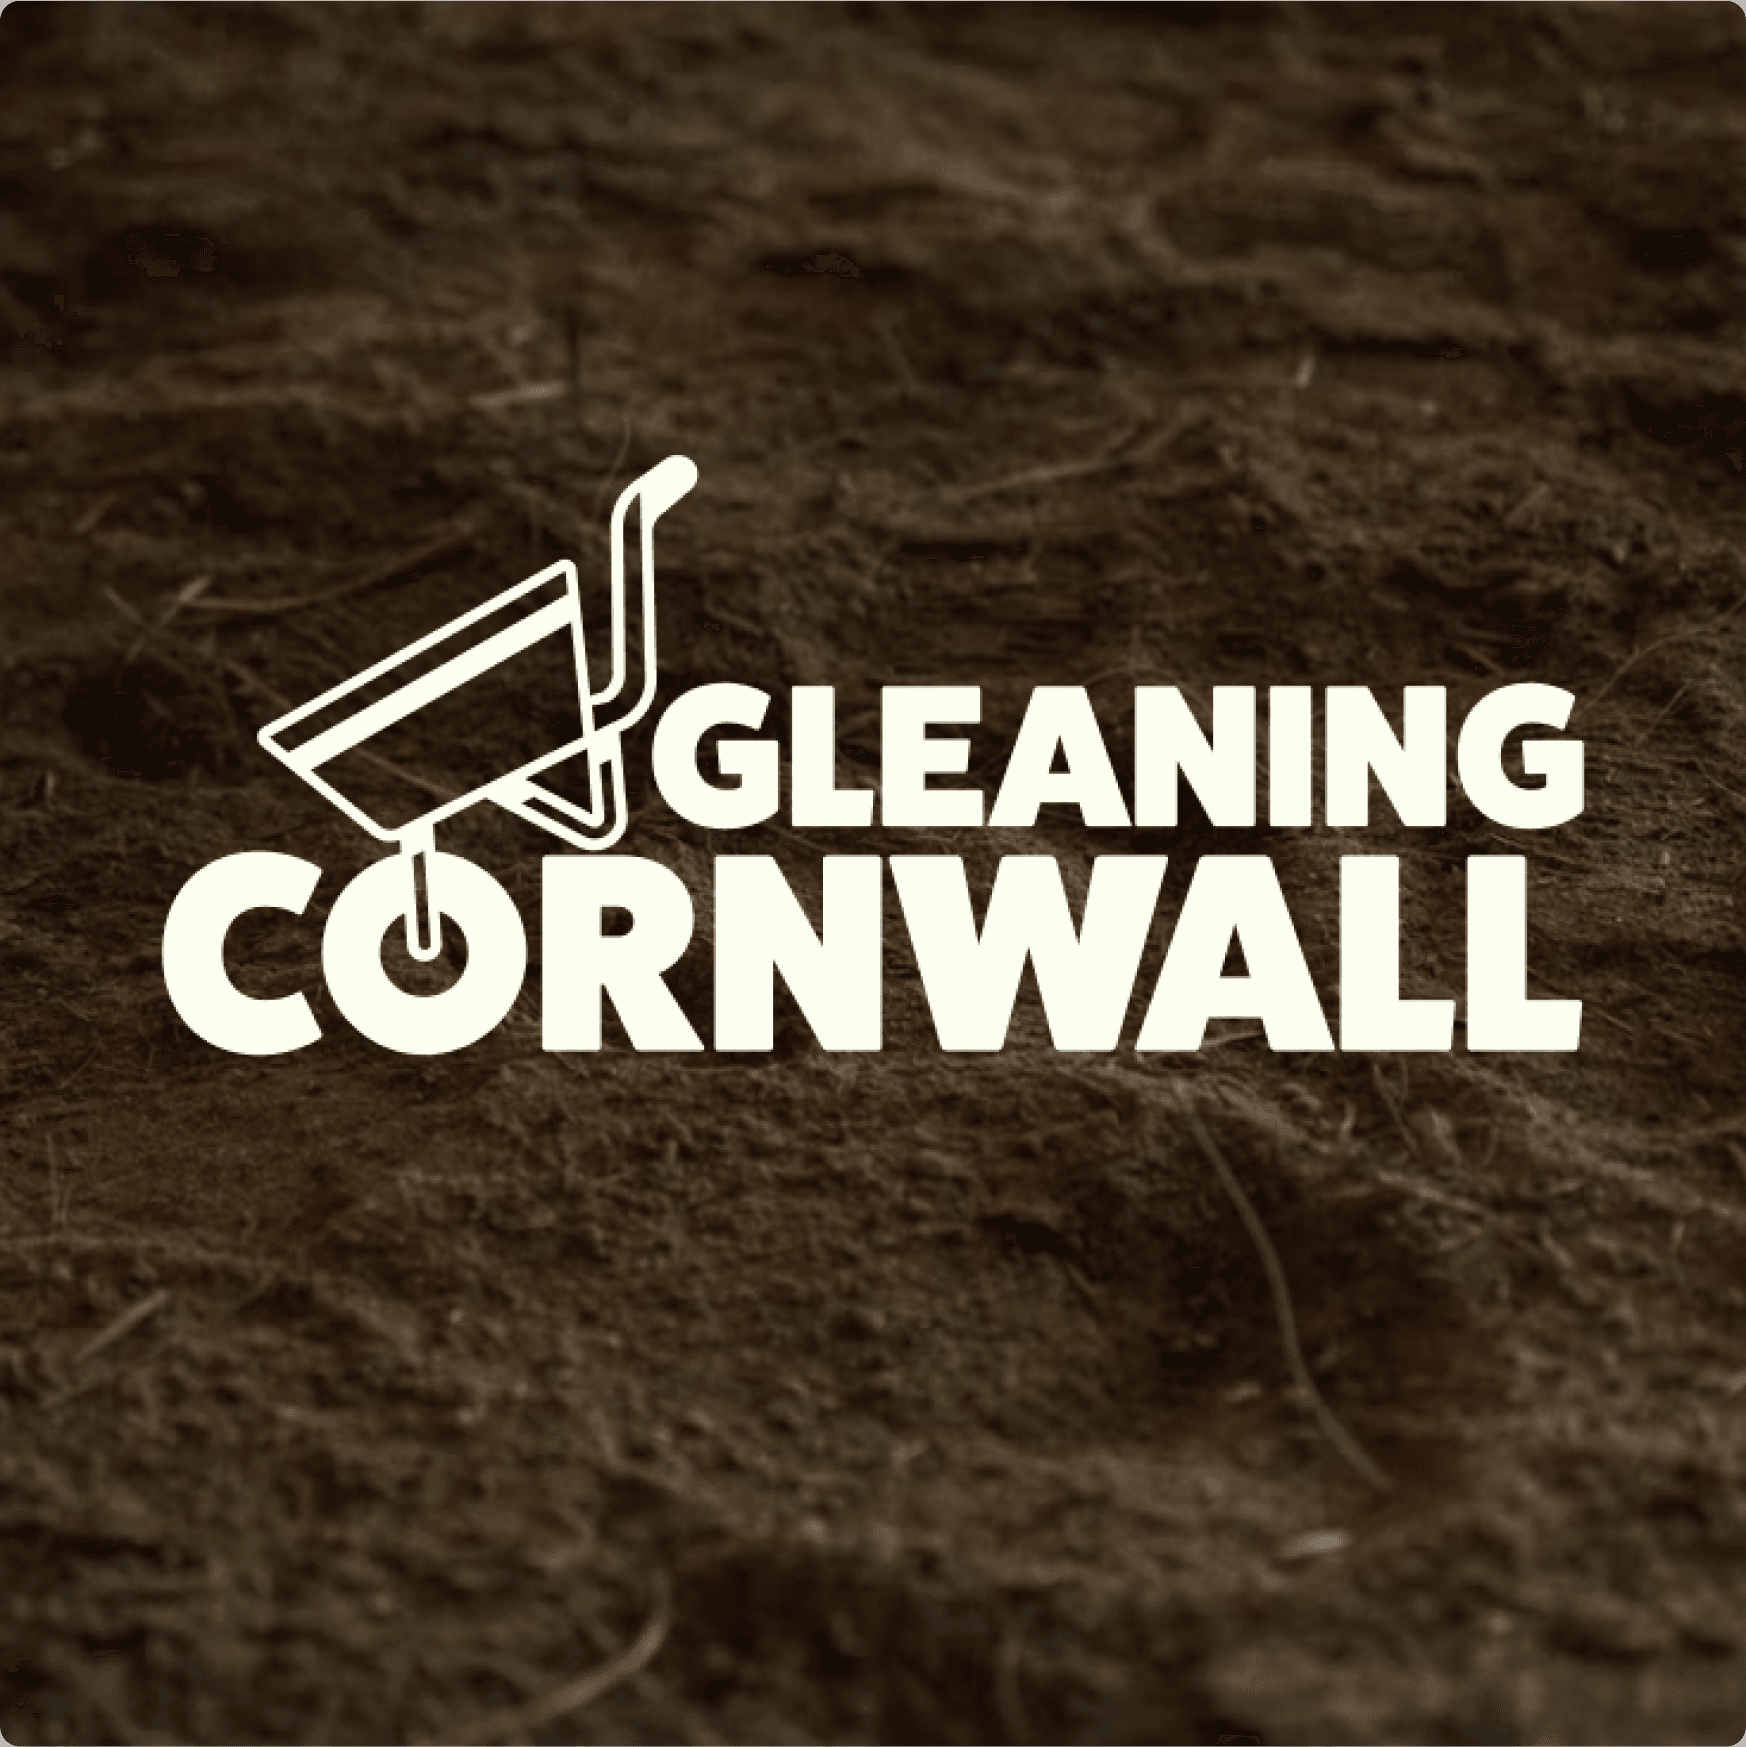 Gleaning Cornwall logo with dirt background